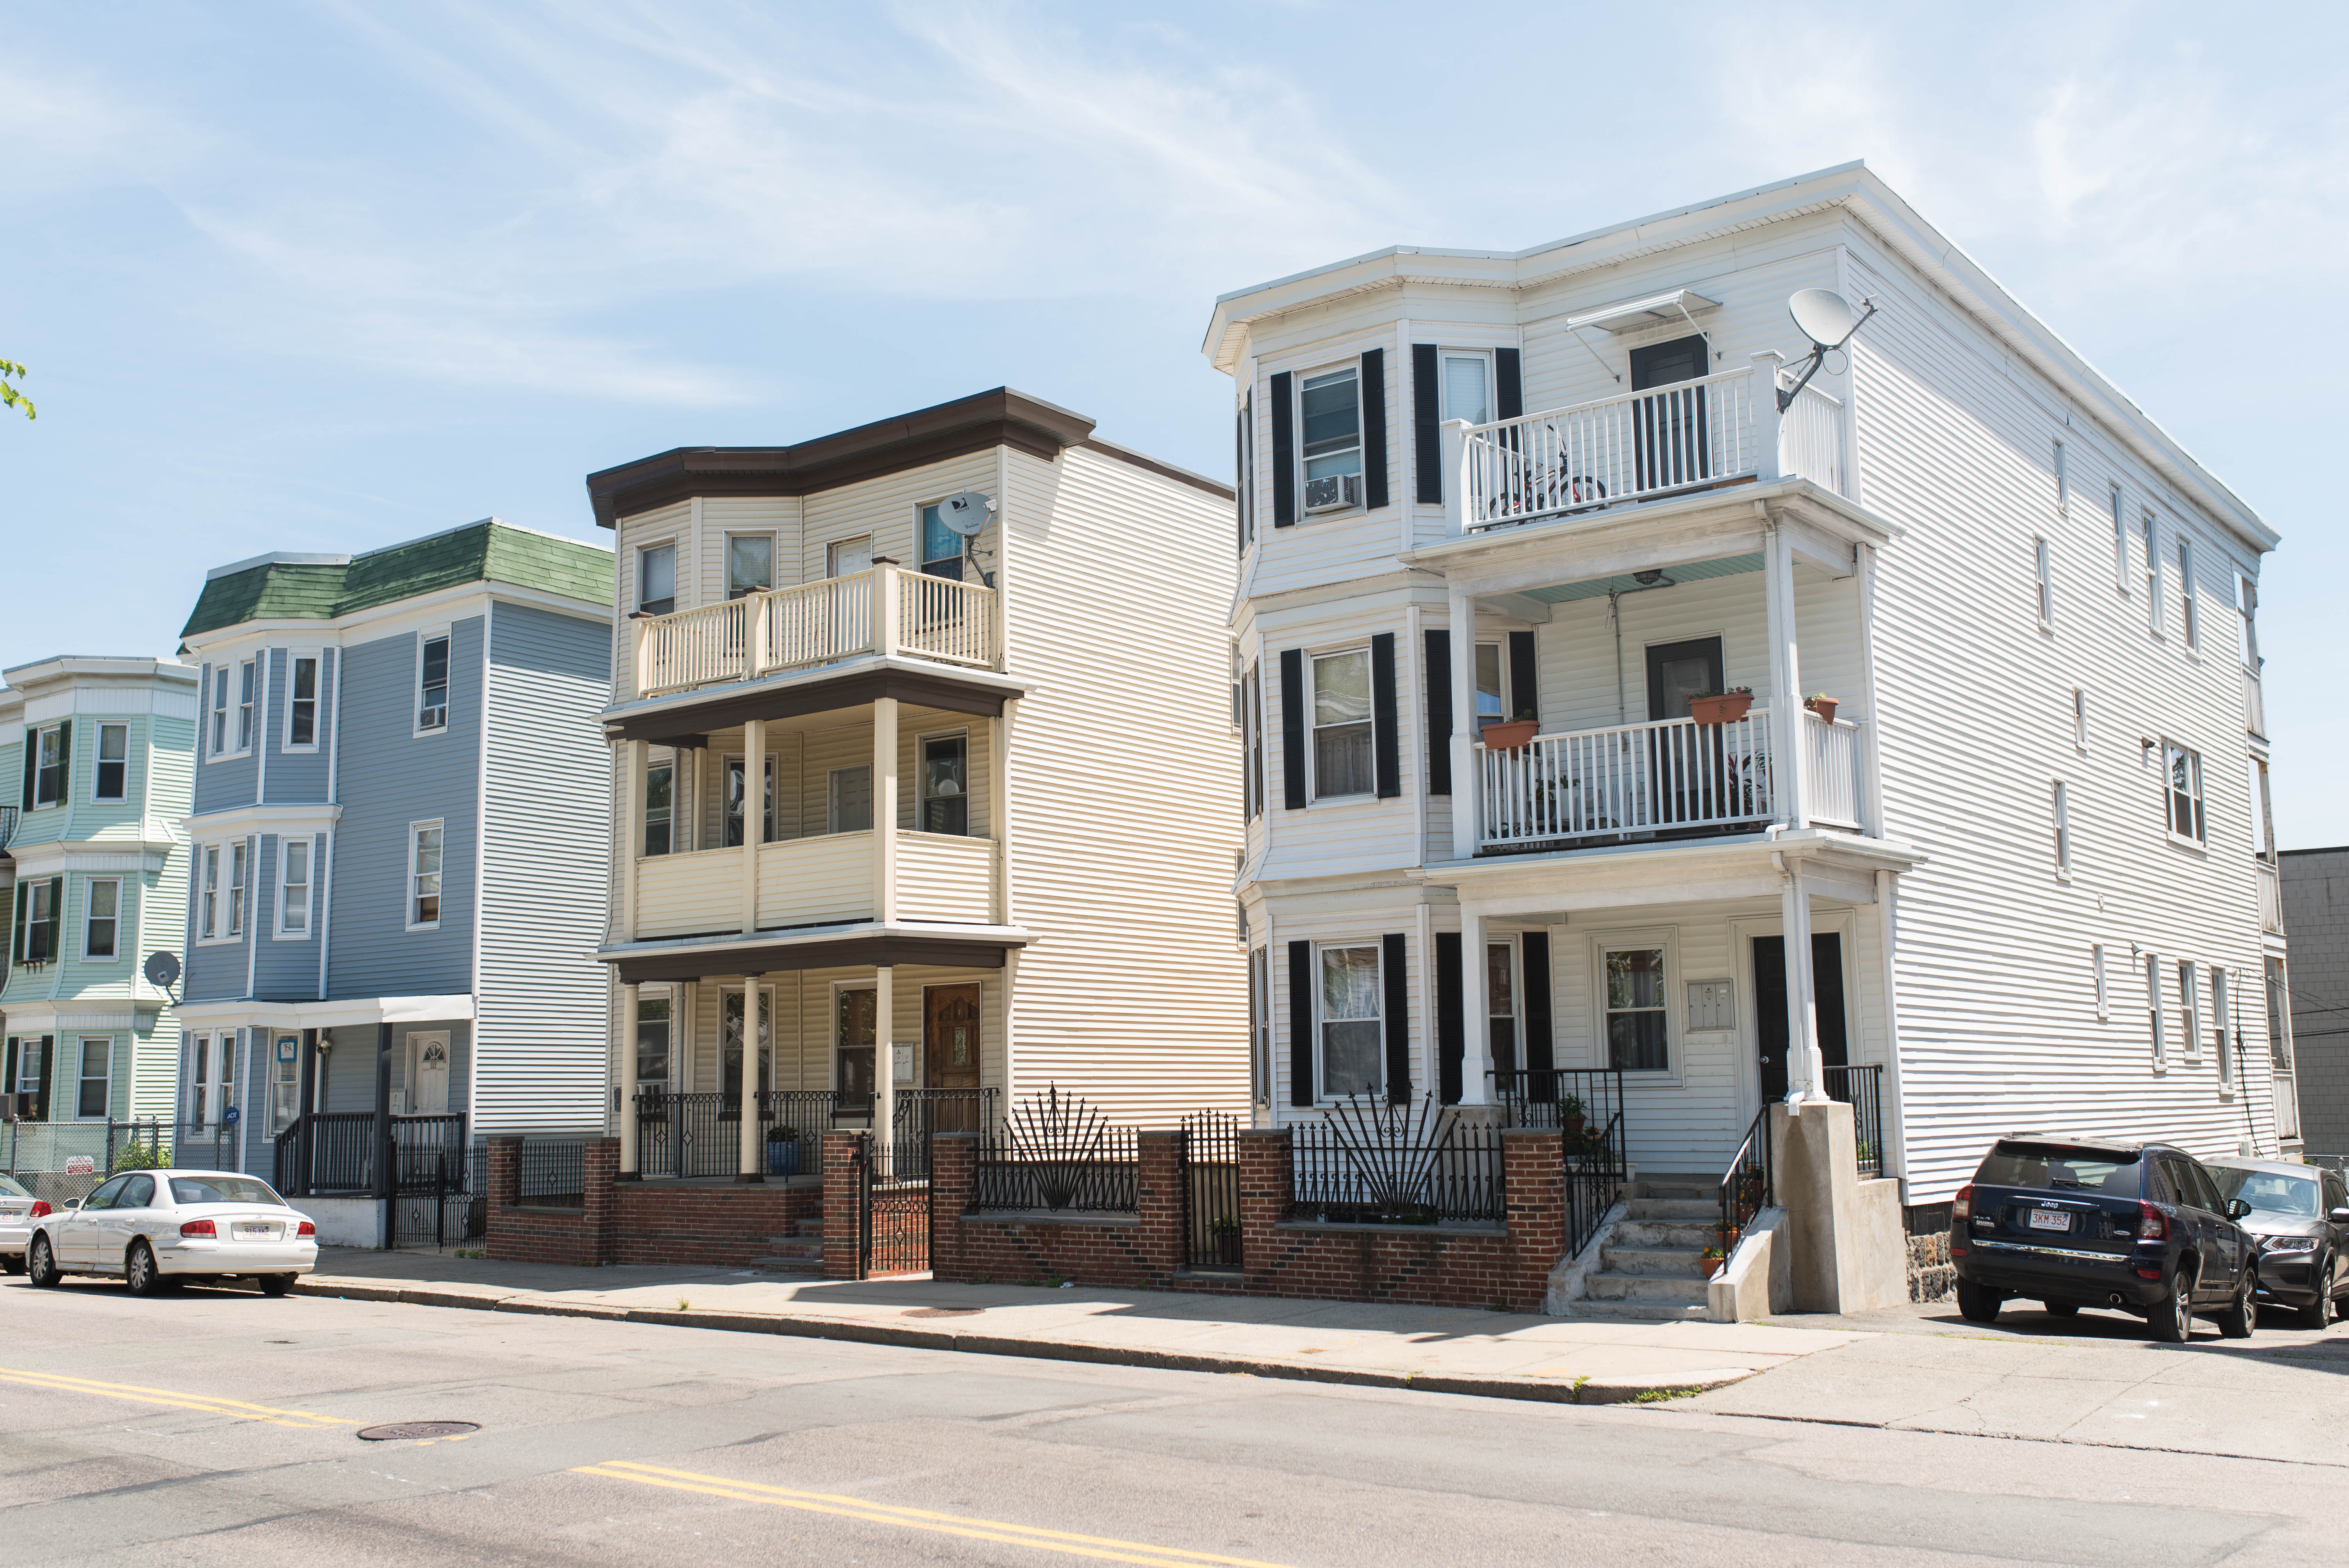 A row of three-story apartment houses on a sidewalk.